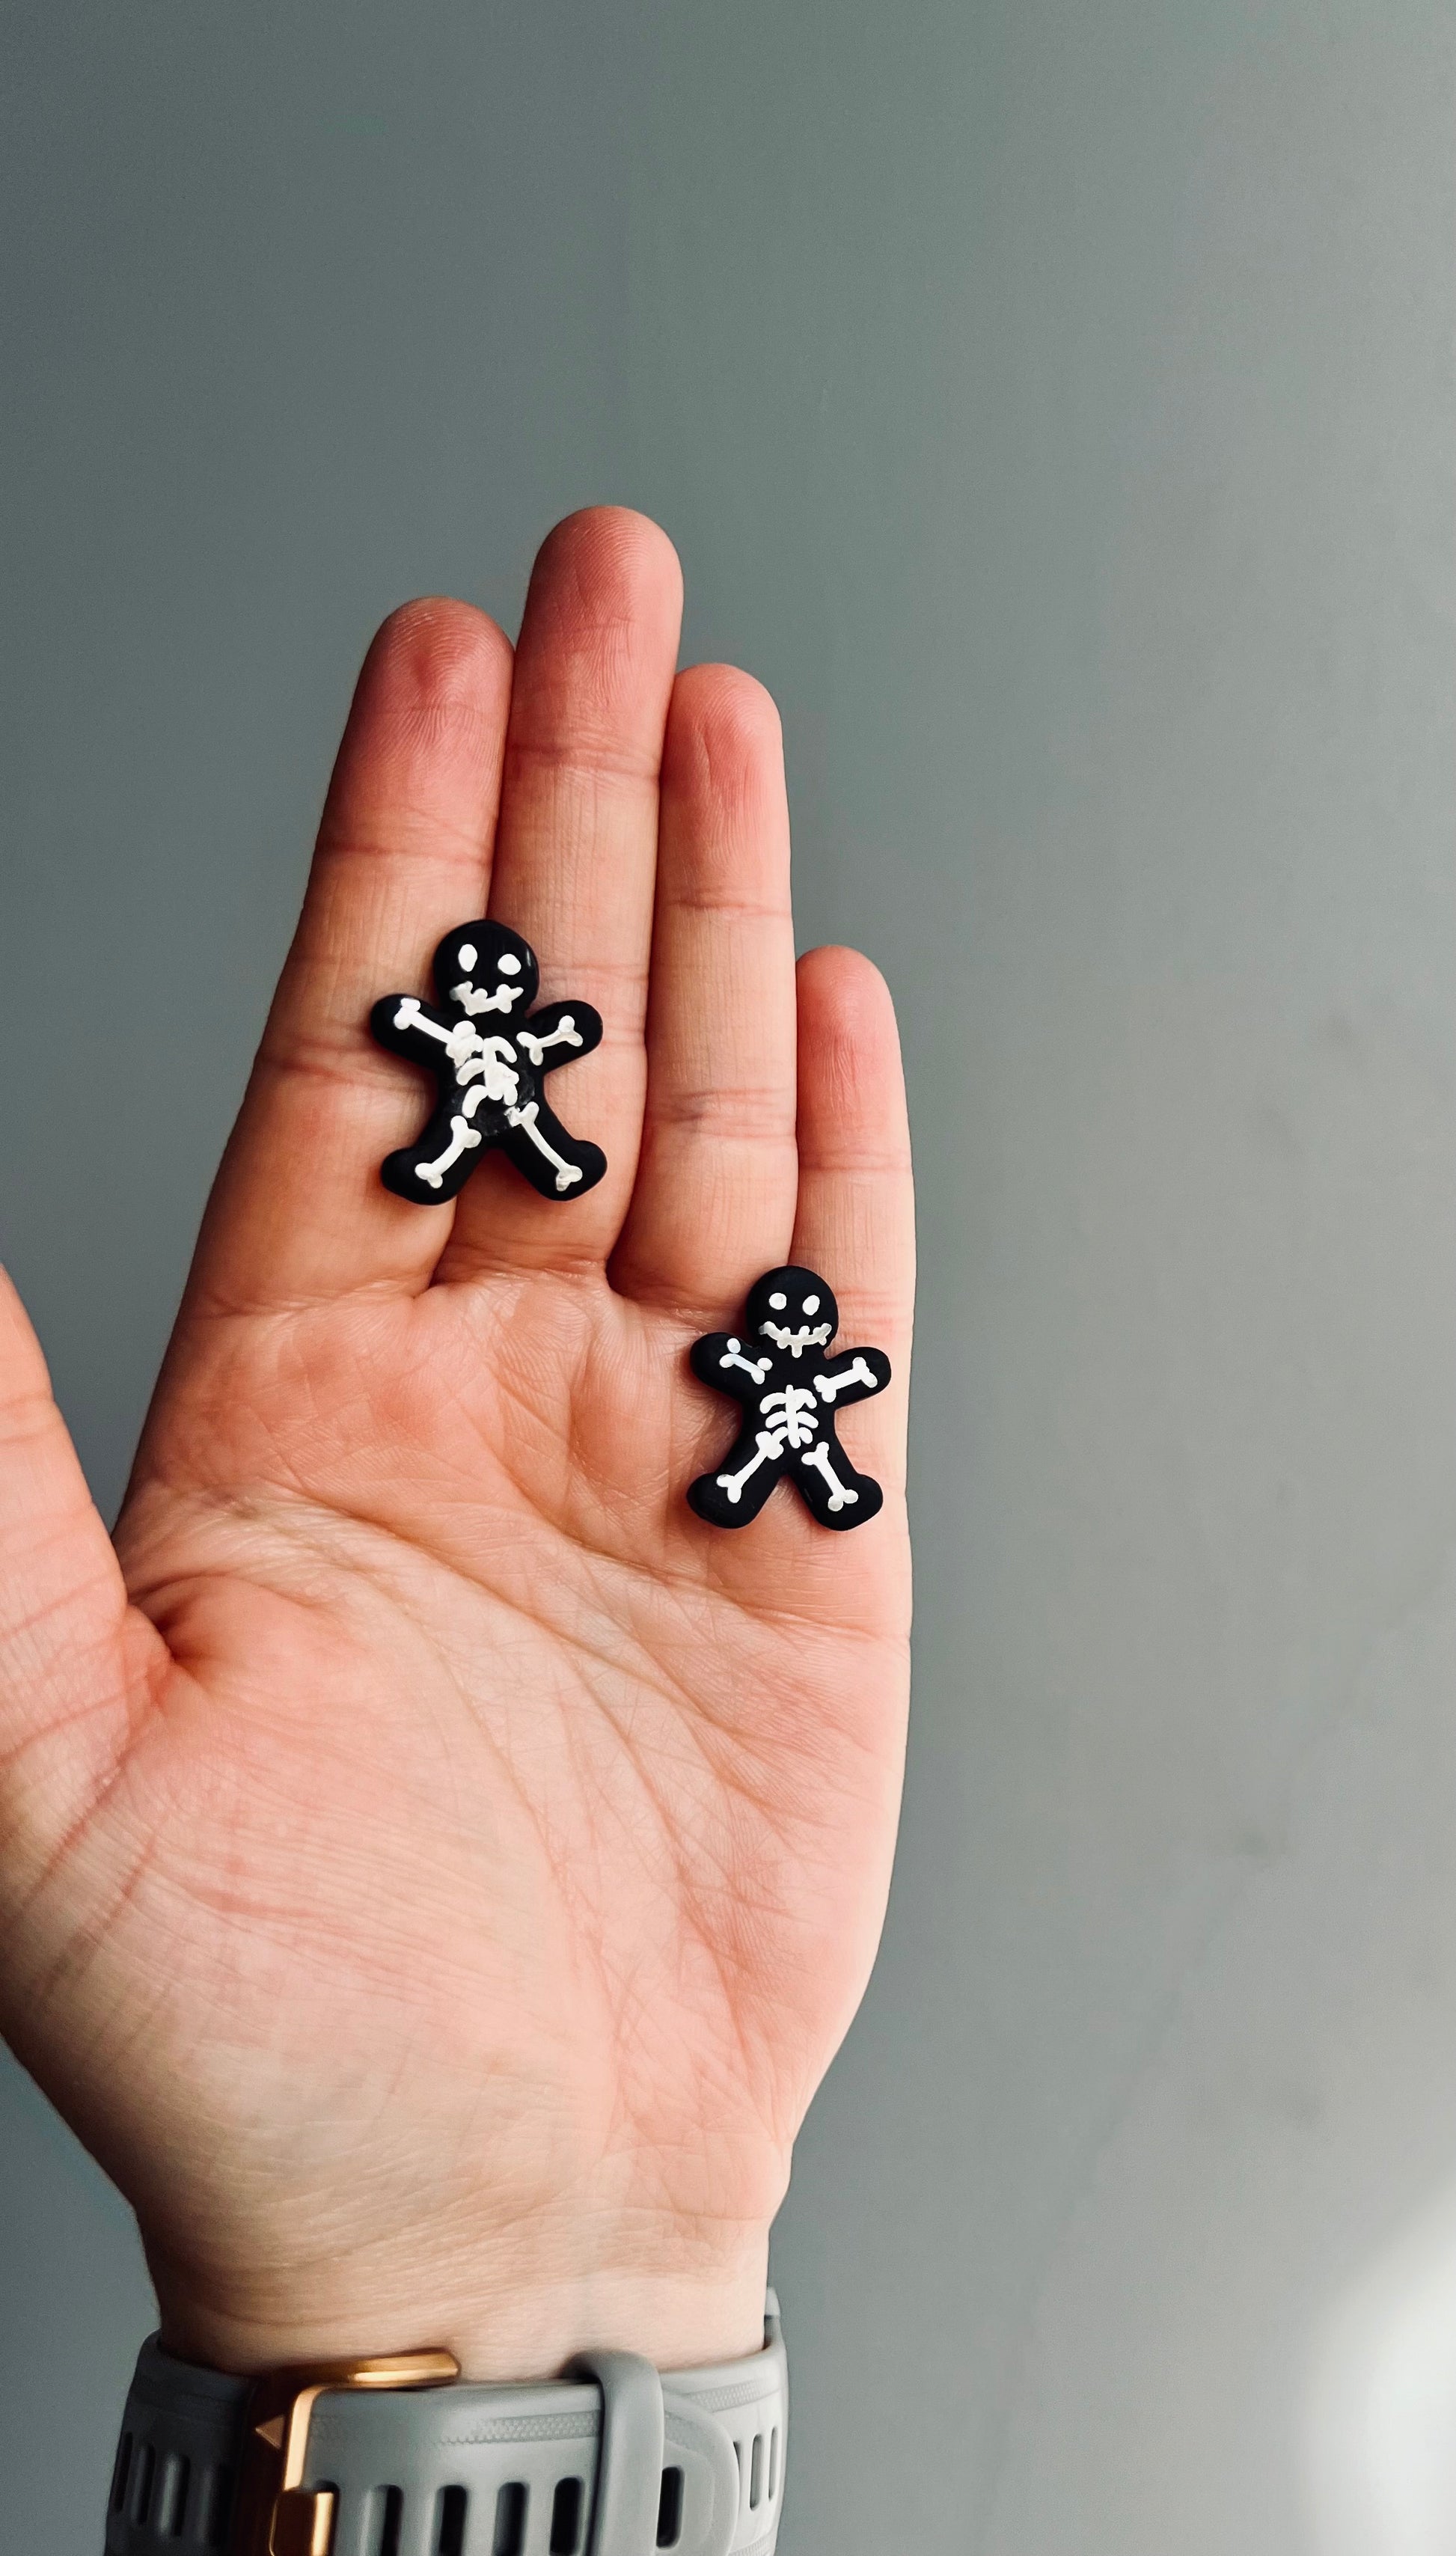 Adorn yourself with our gothic-inspired skeleton earrings, crafted in black with silver bones for a captivating accessory that exudes eerie elegance.